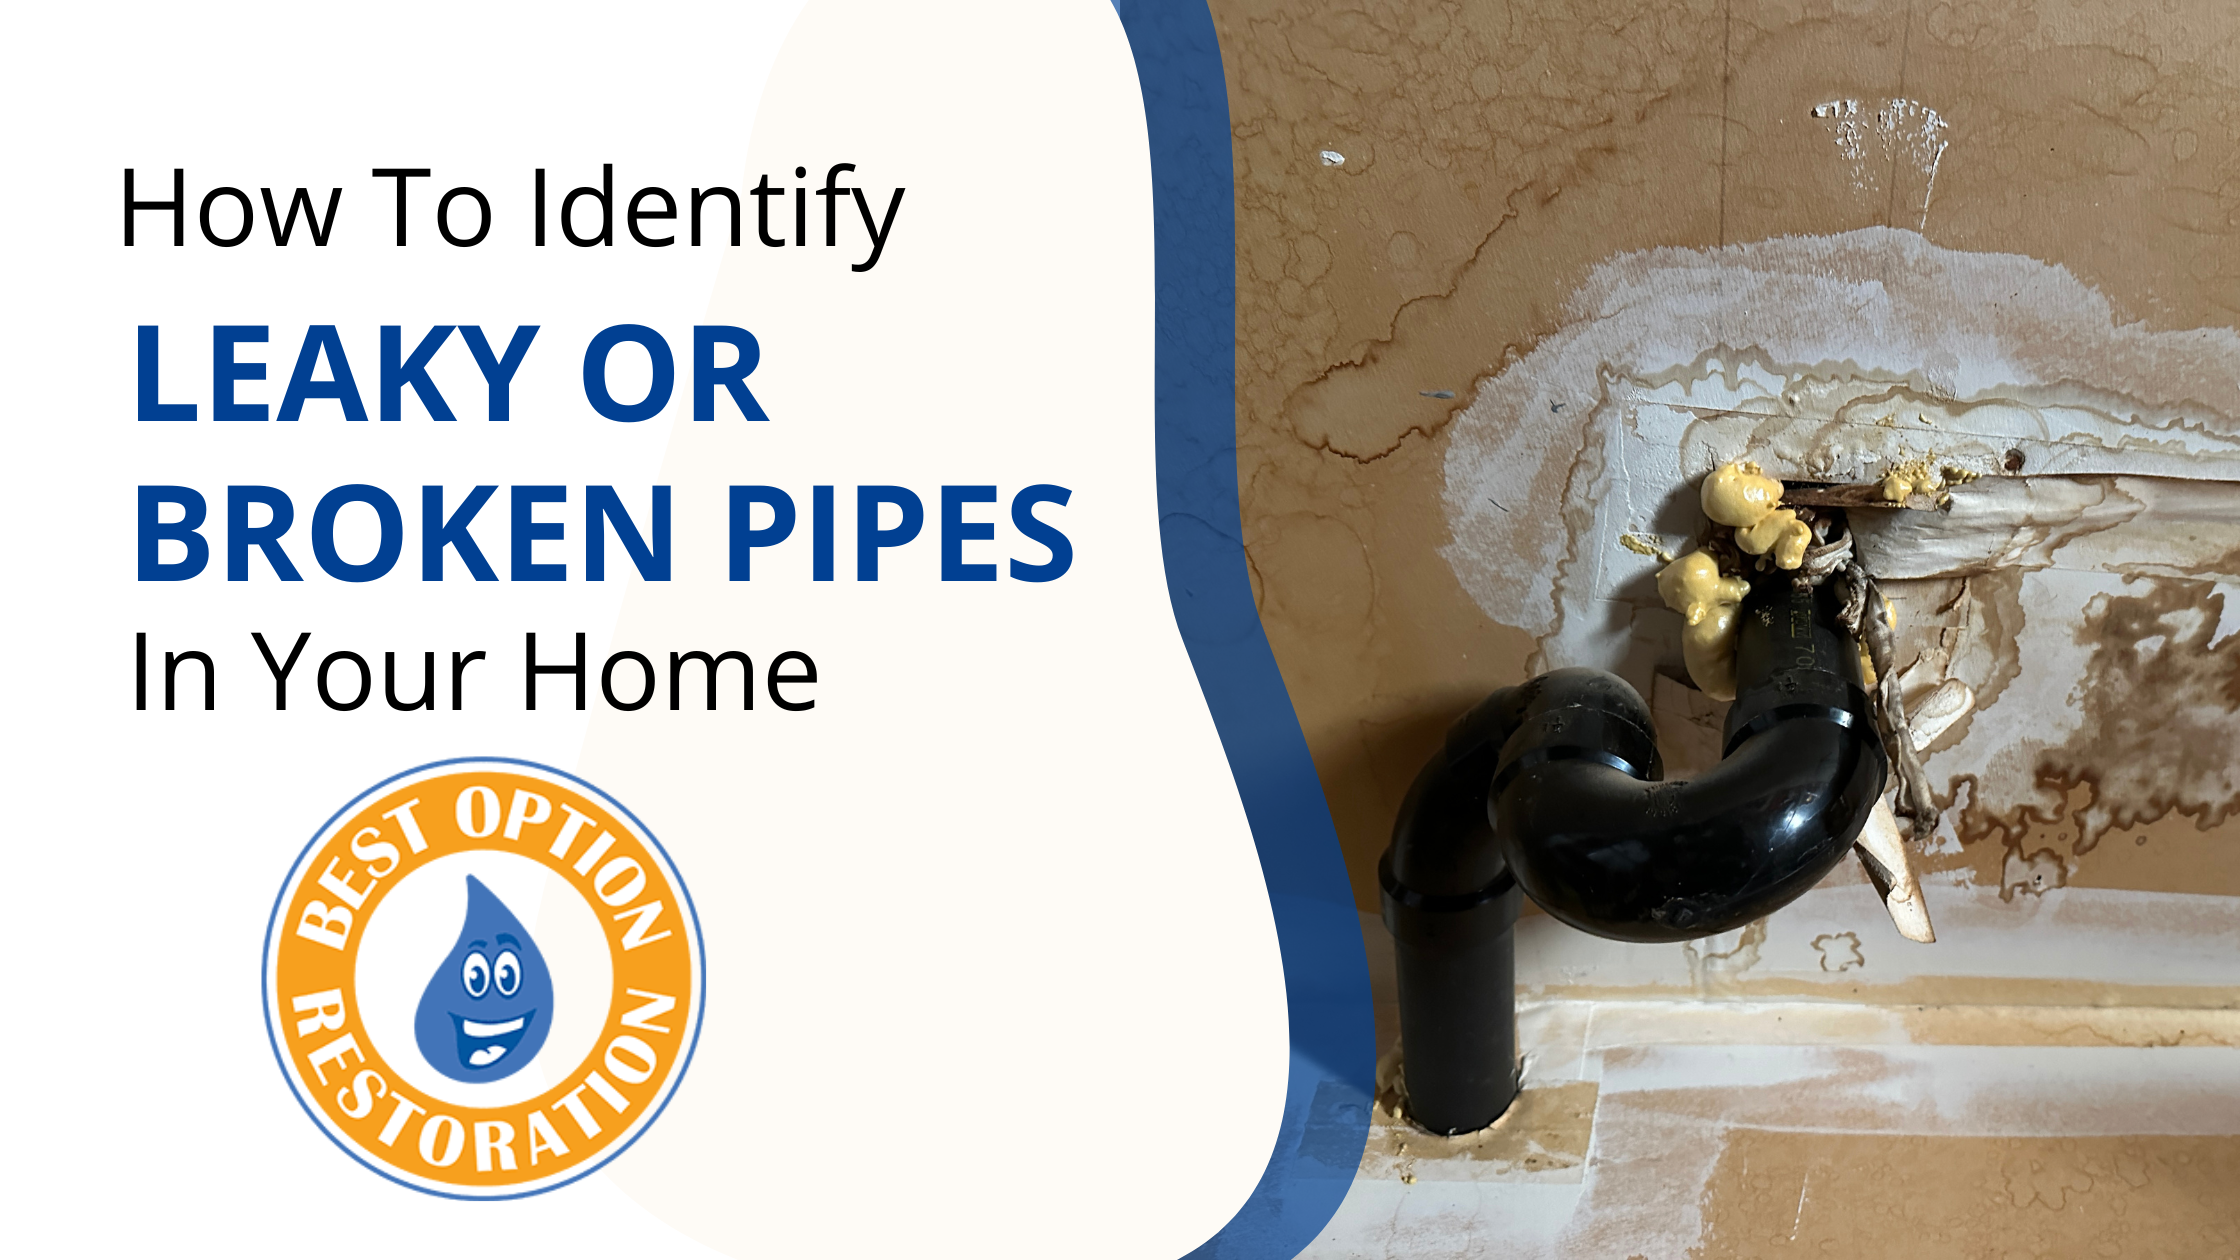 Detecting the Hidden: How to Identify Leaky or Broken Pipes in Your Home